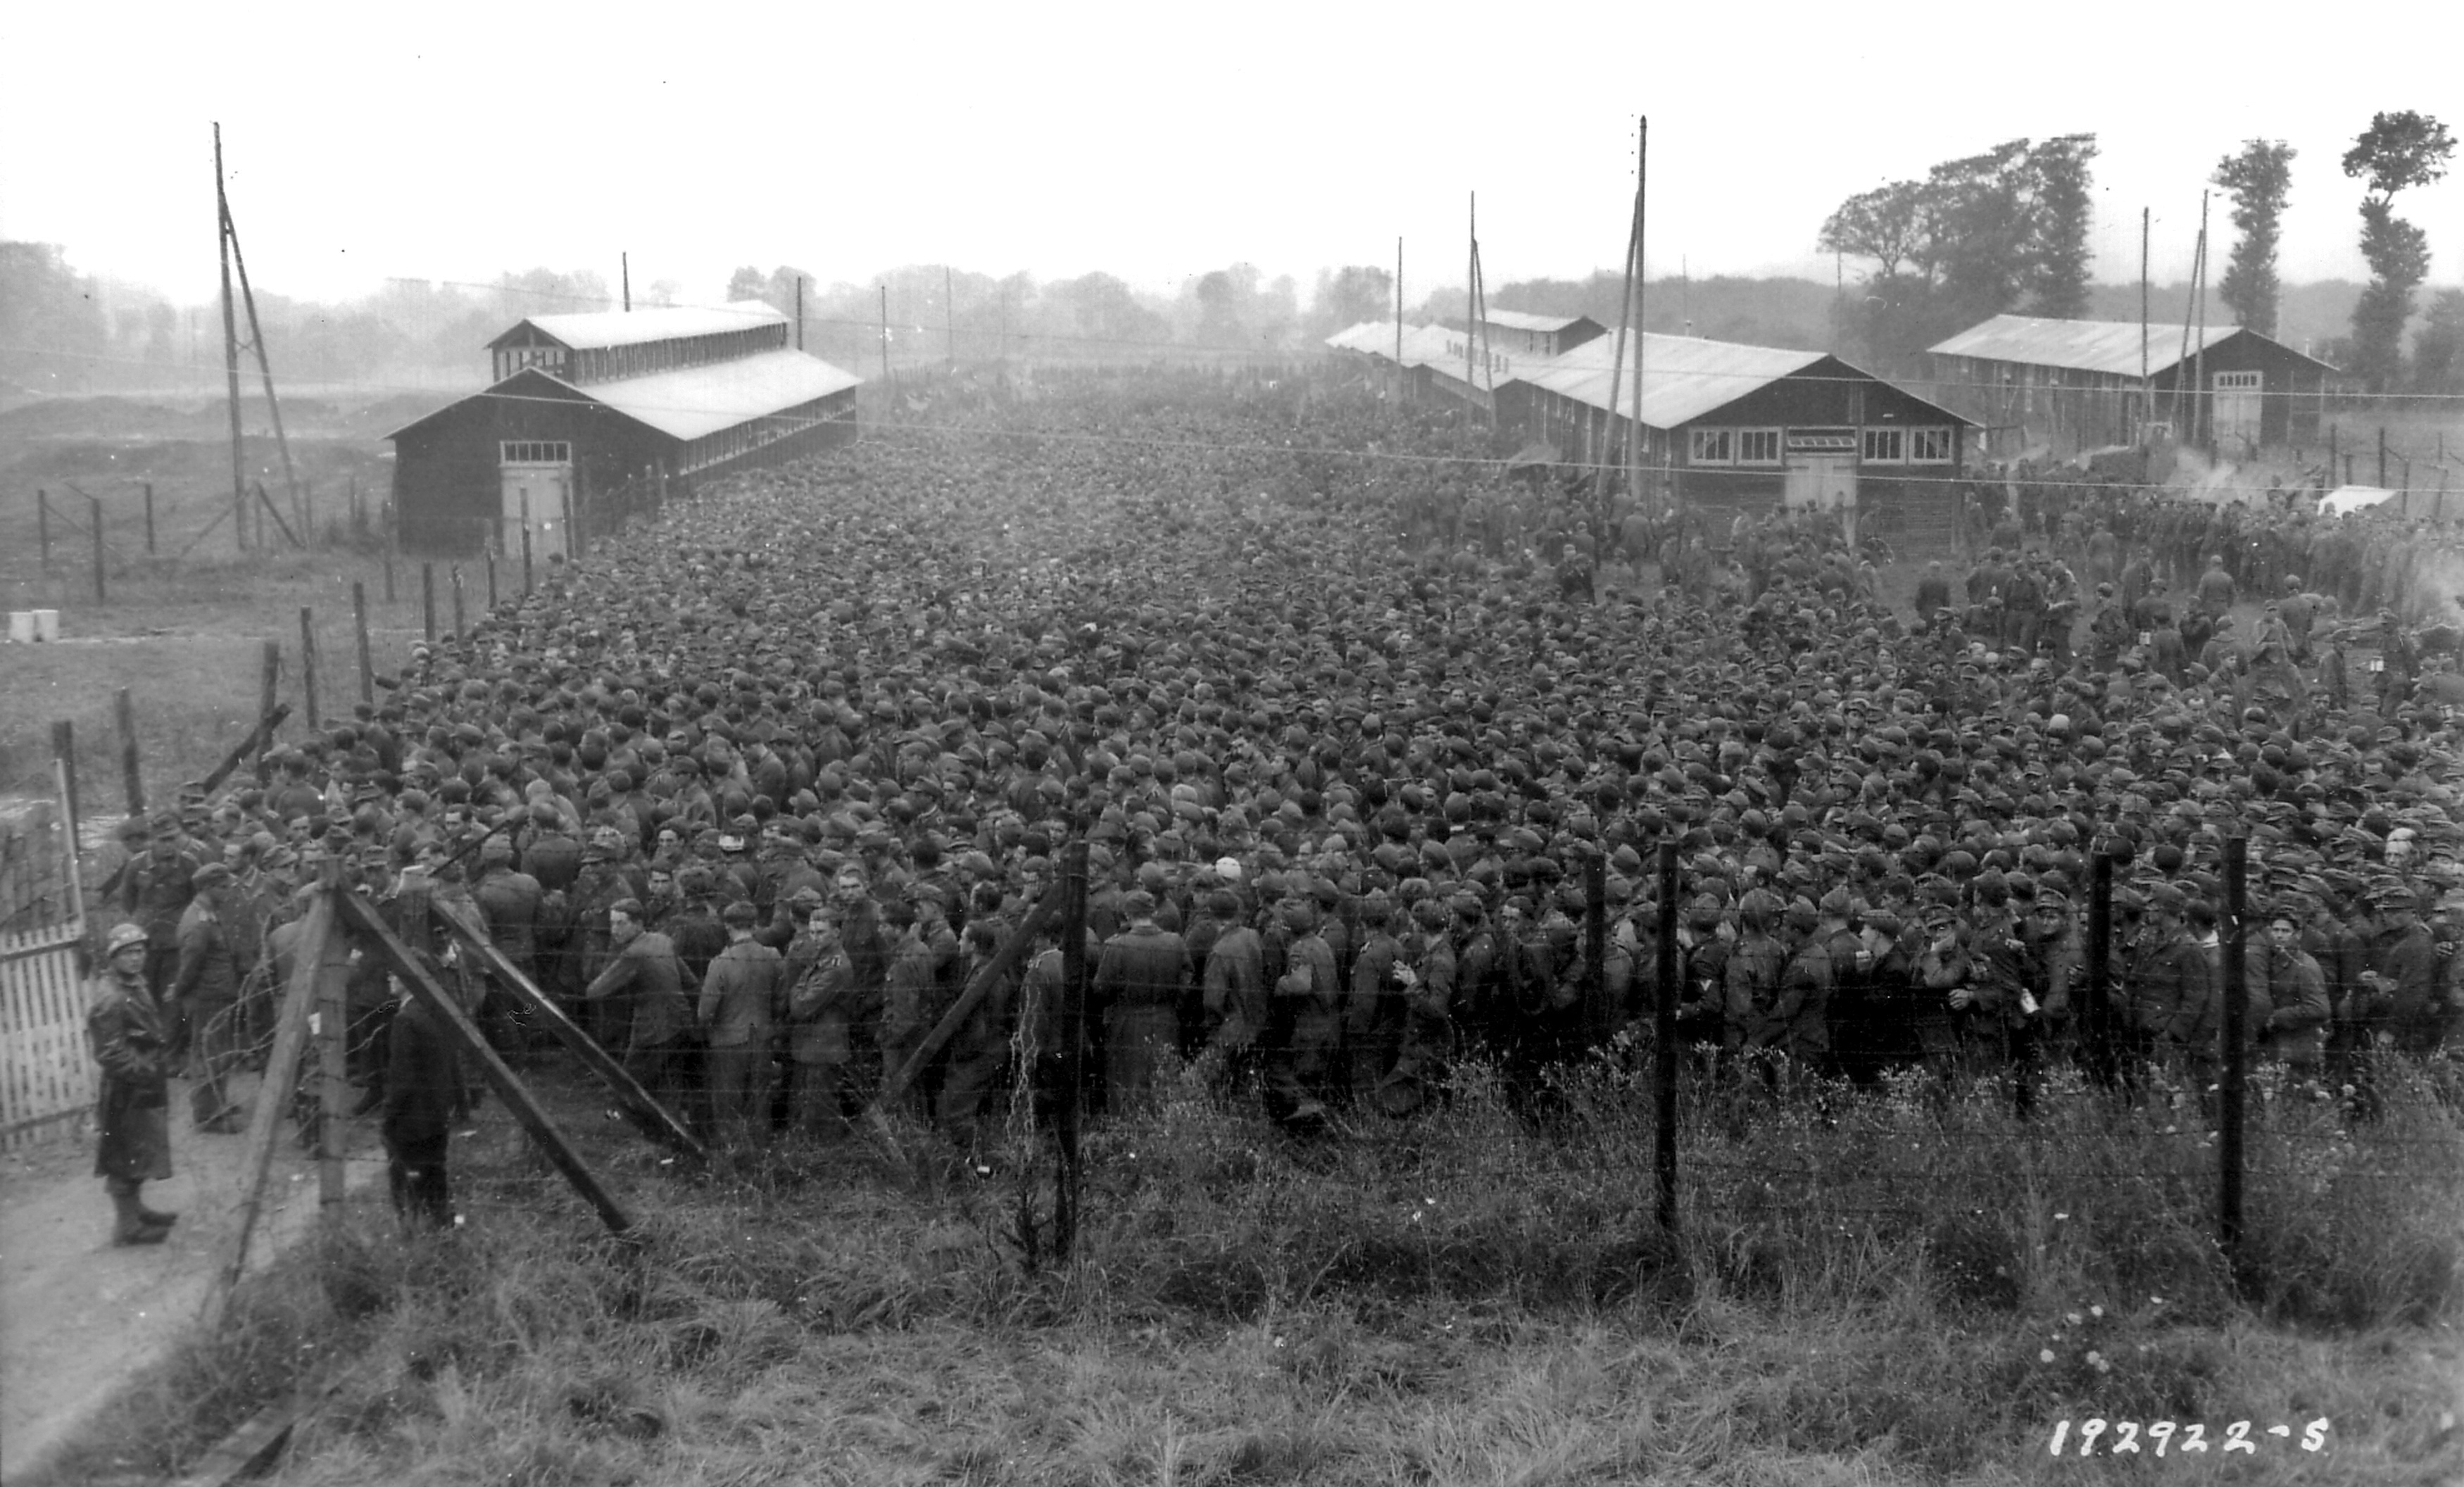 Handout photo of German POWs being guarded by U.S. troops at a camp in Nonant-le-Pin